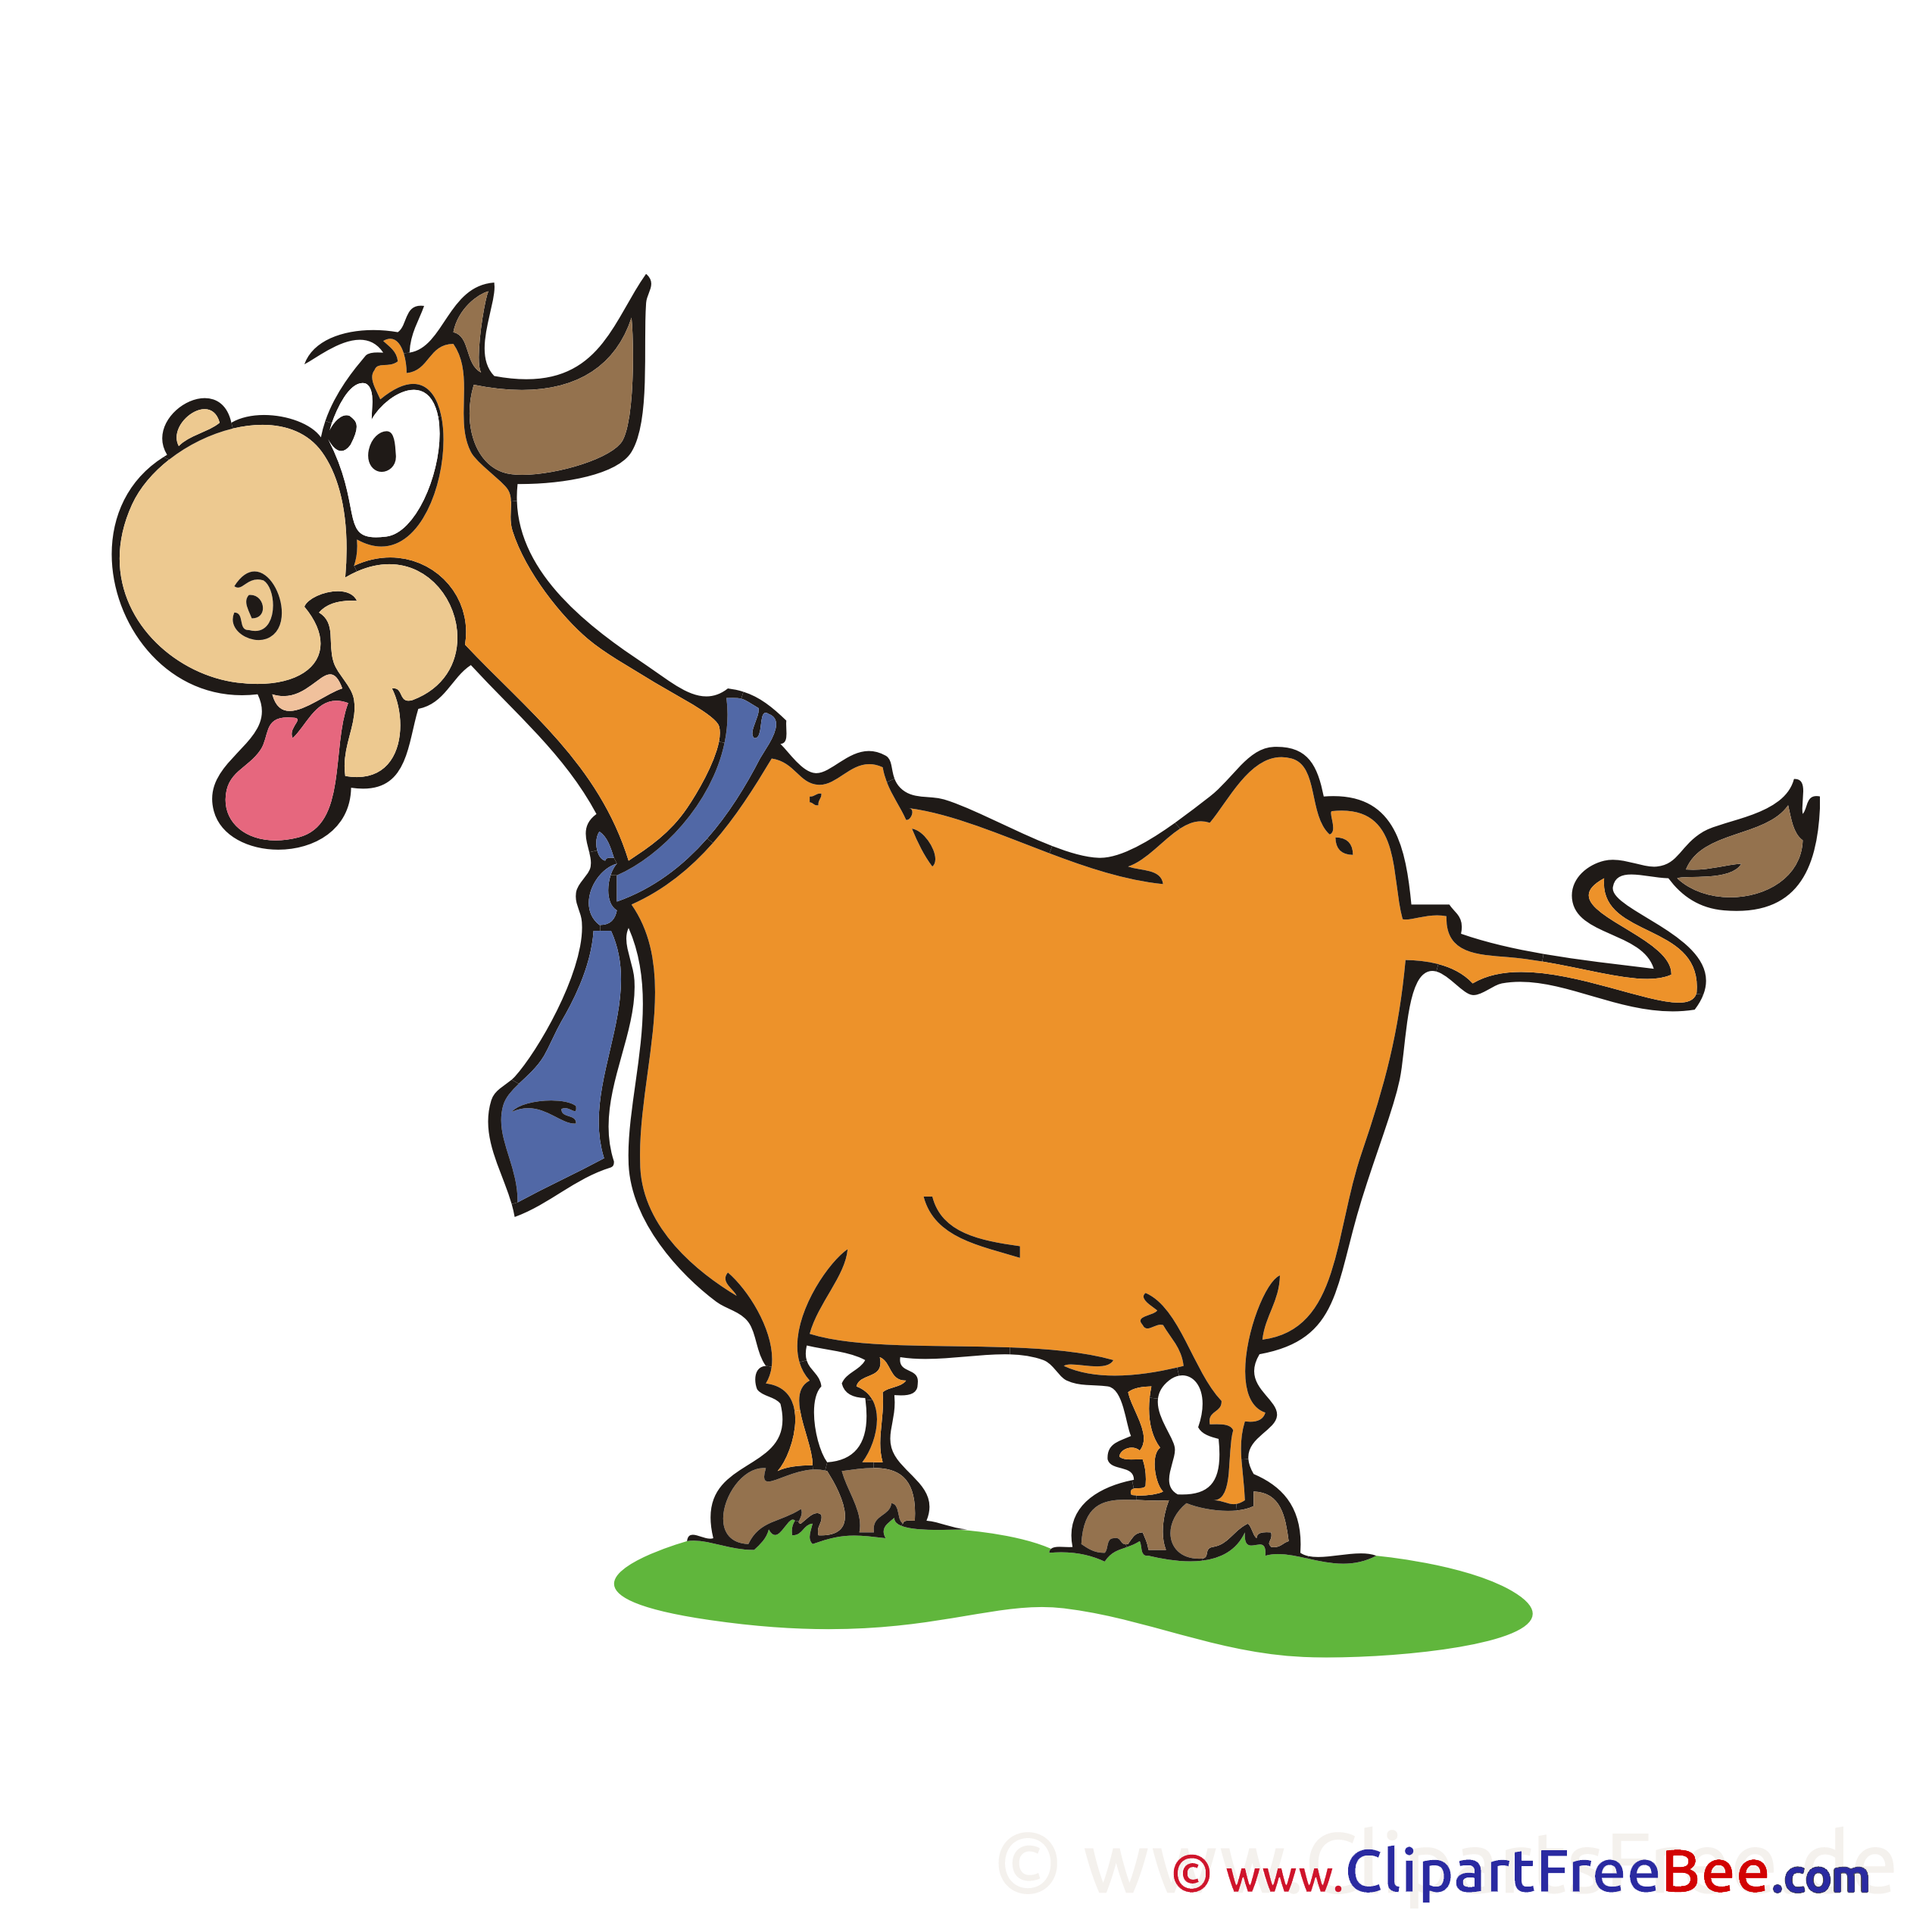 Cow Tie Clip Art download for free